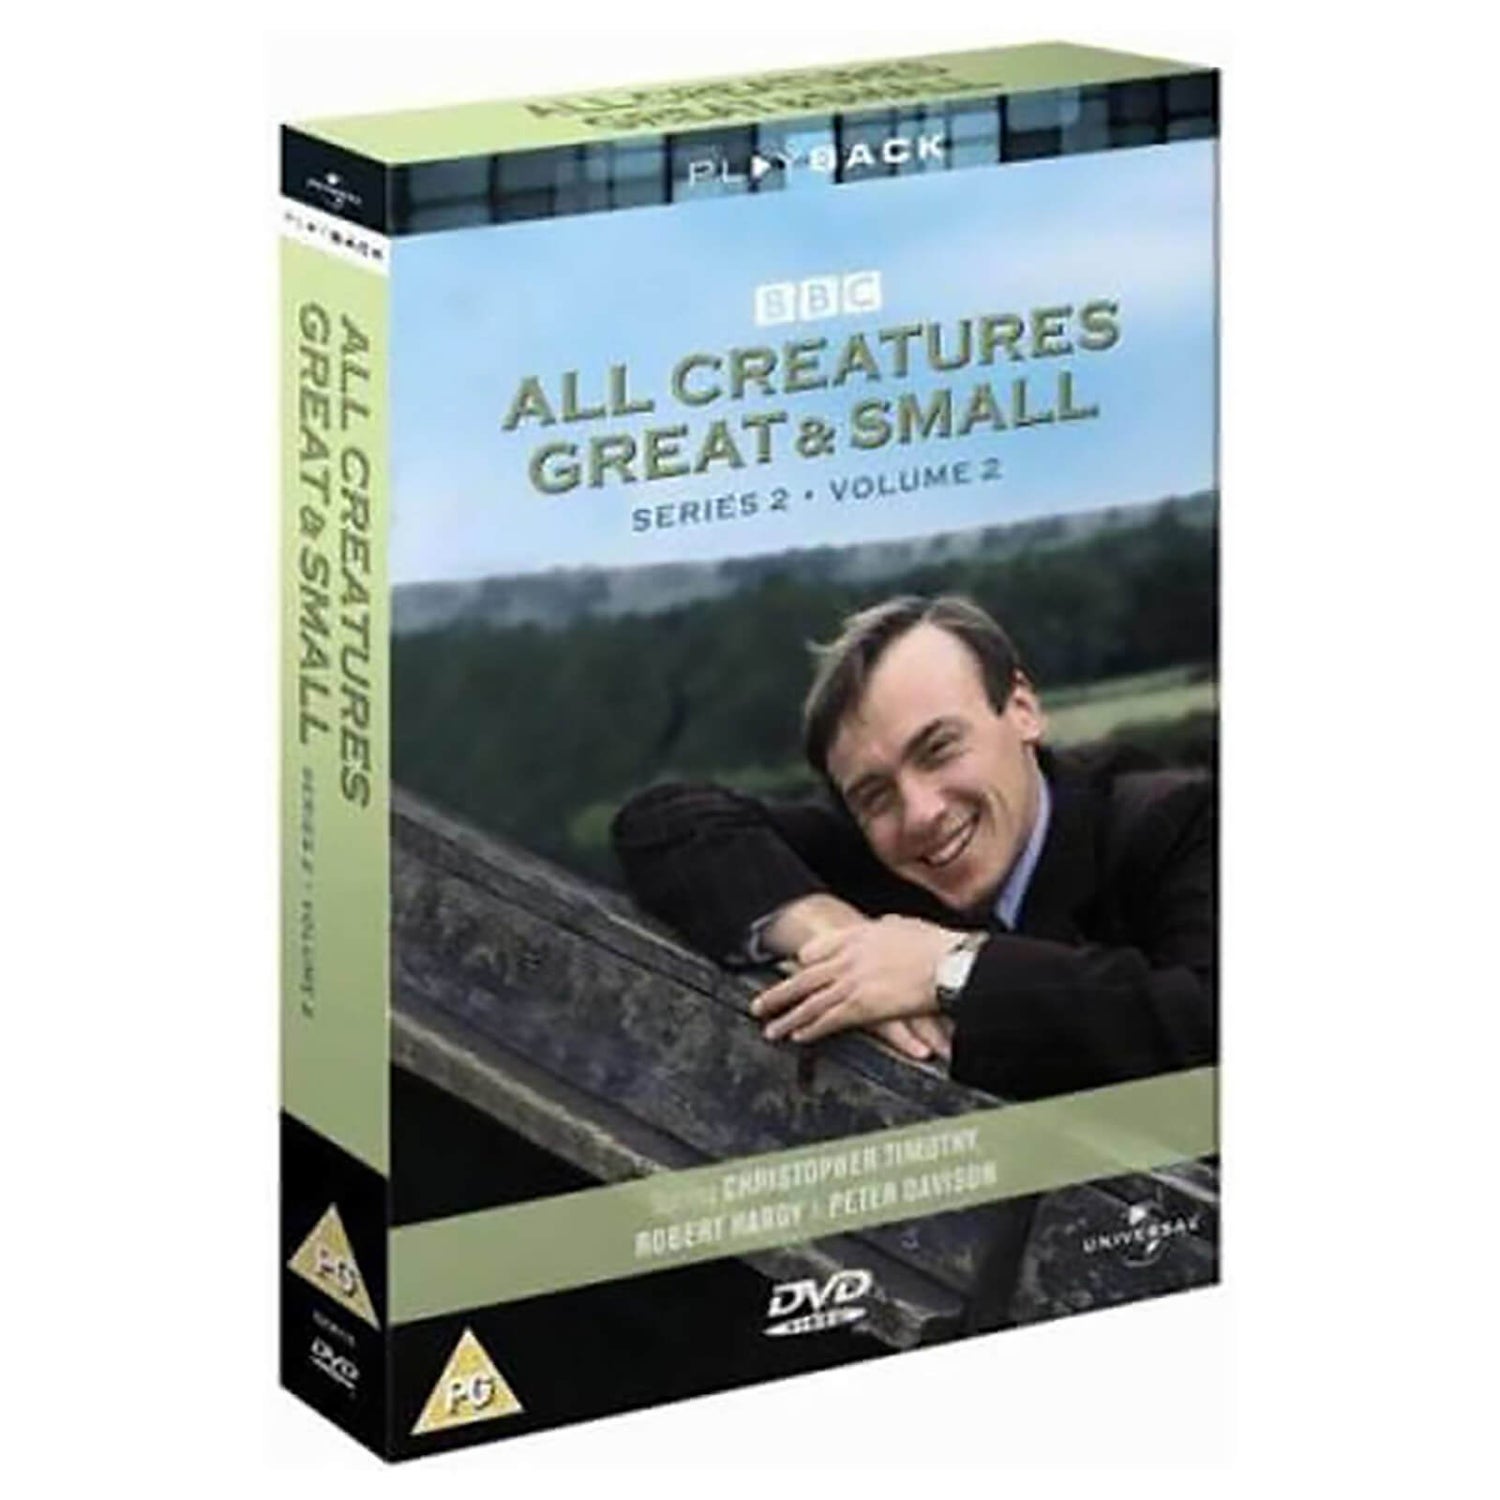 All Creatures Great And Small - Serie 2 Volume 2